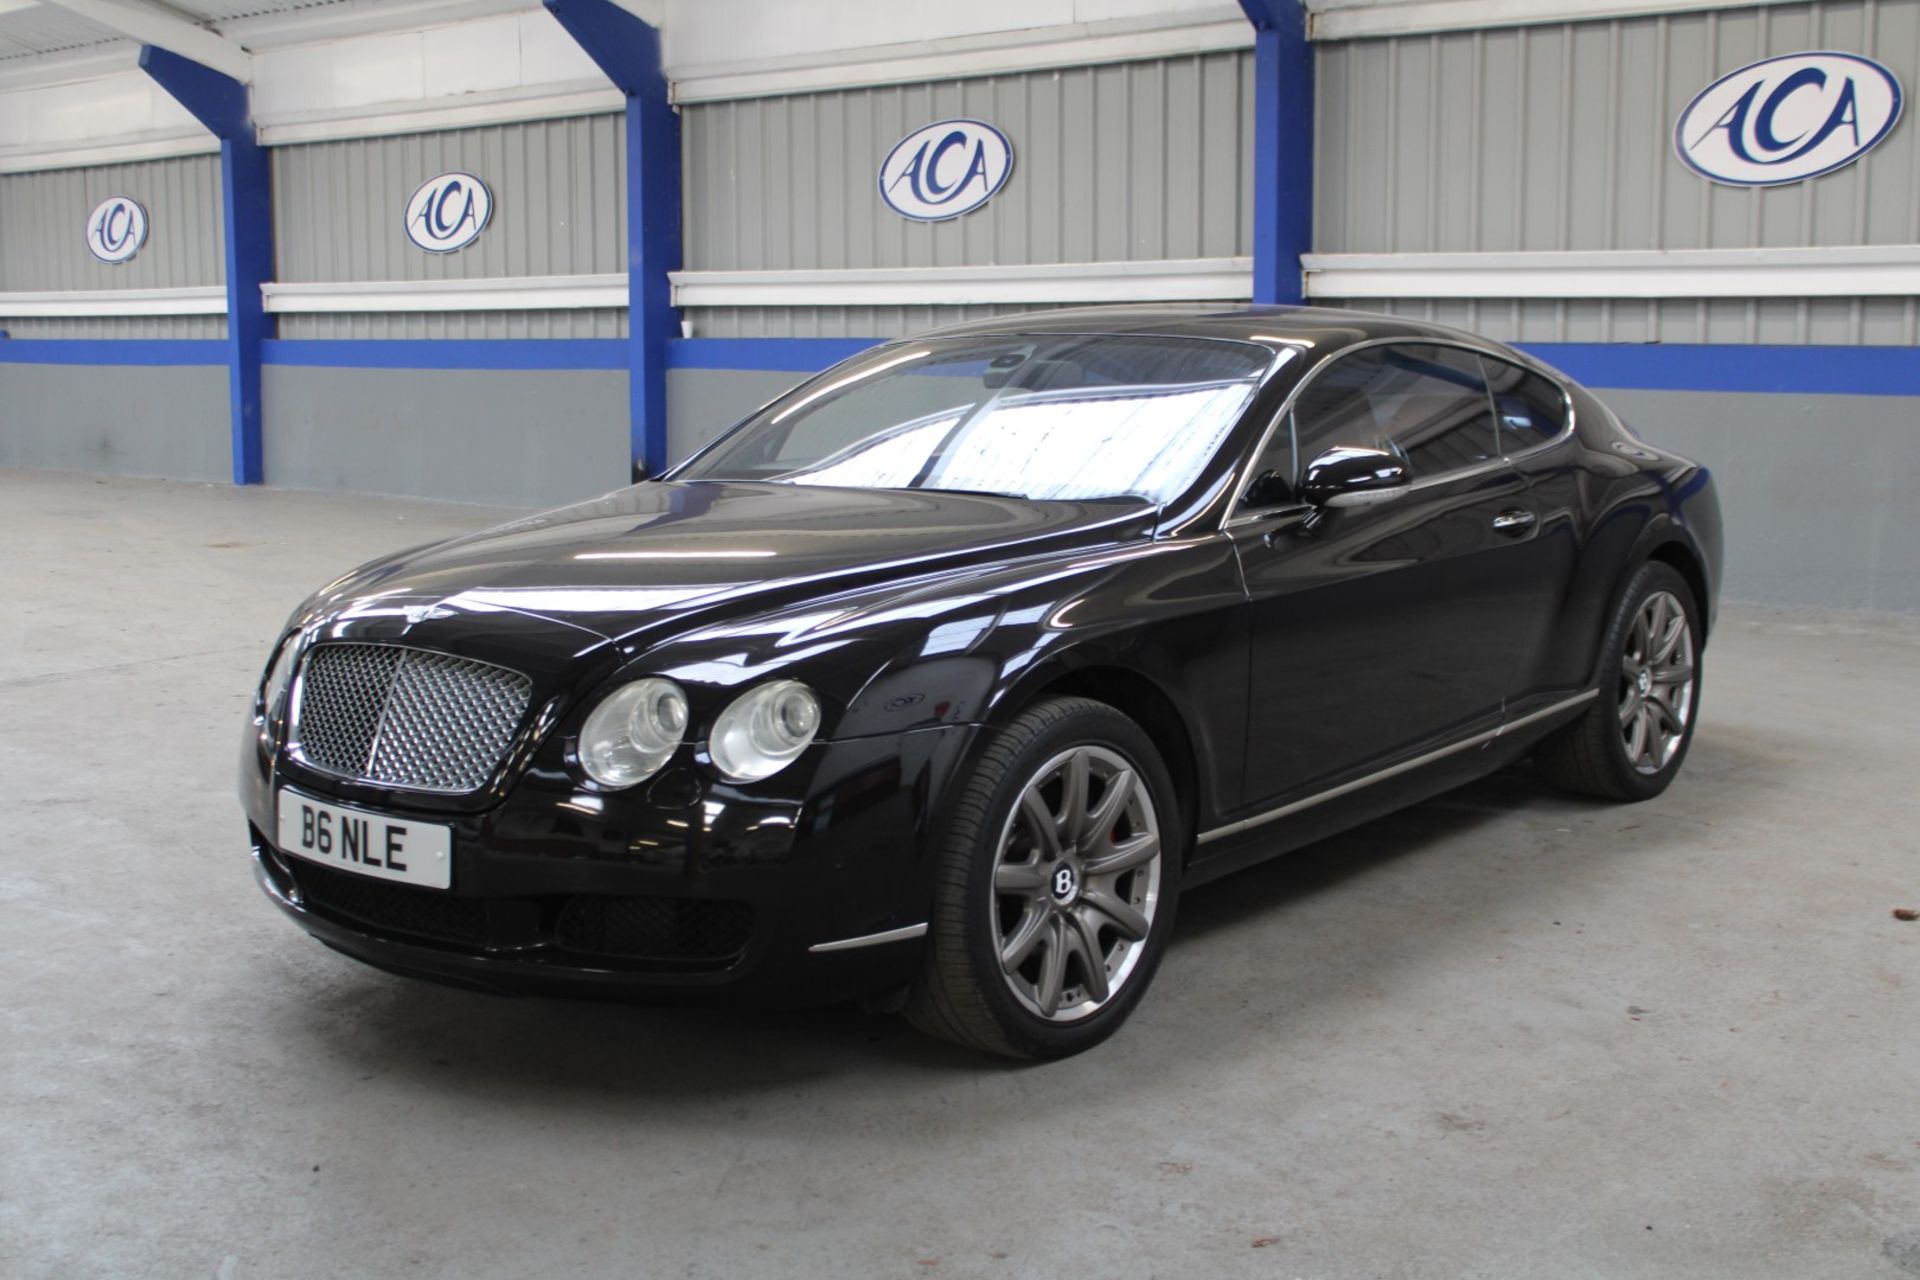 2004 Bentley Continental GT Auto Coupe - Image 3 of 21